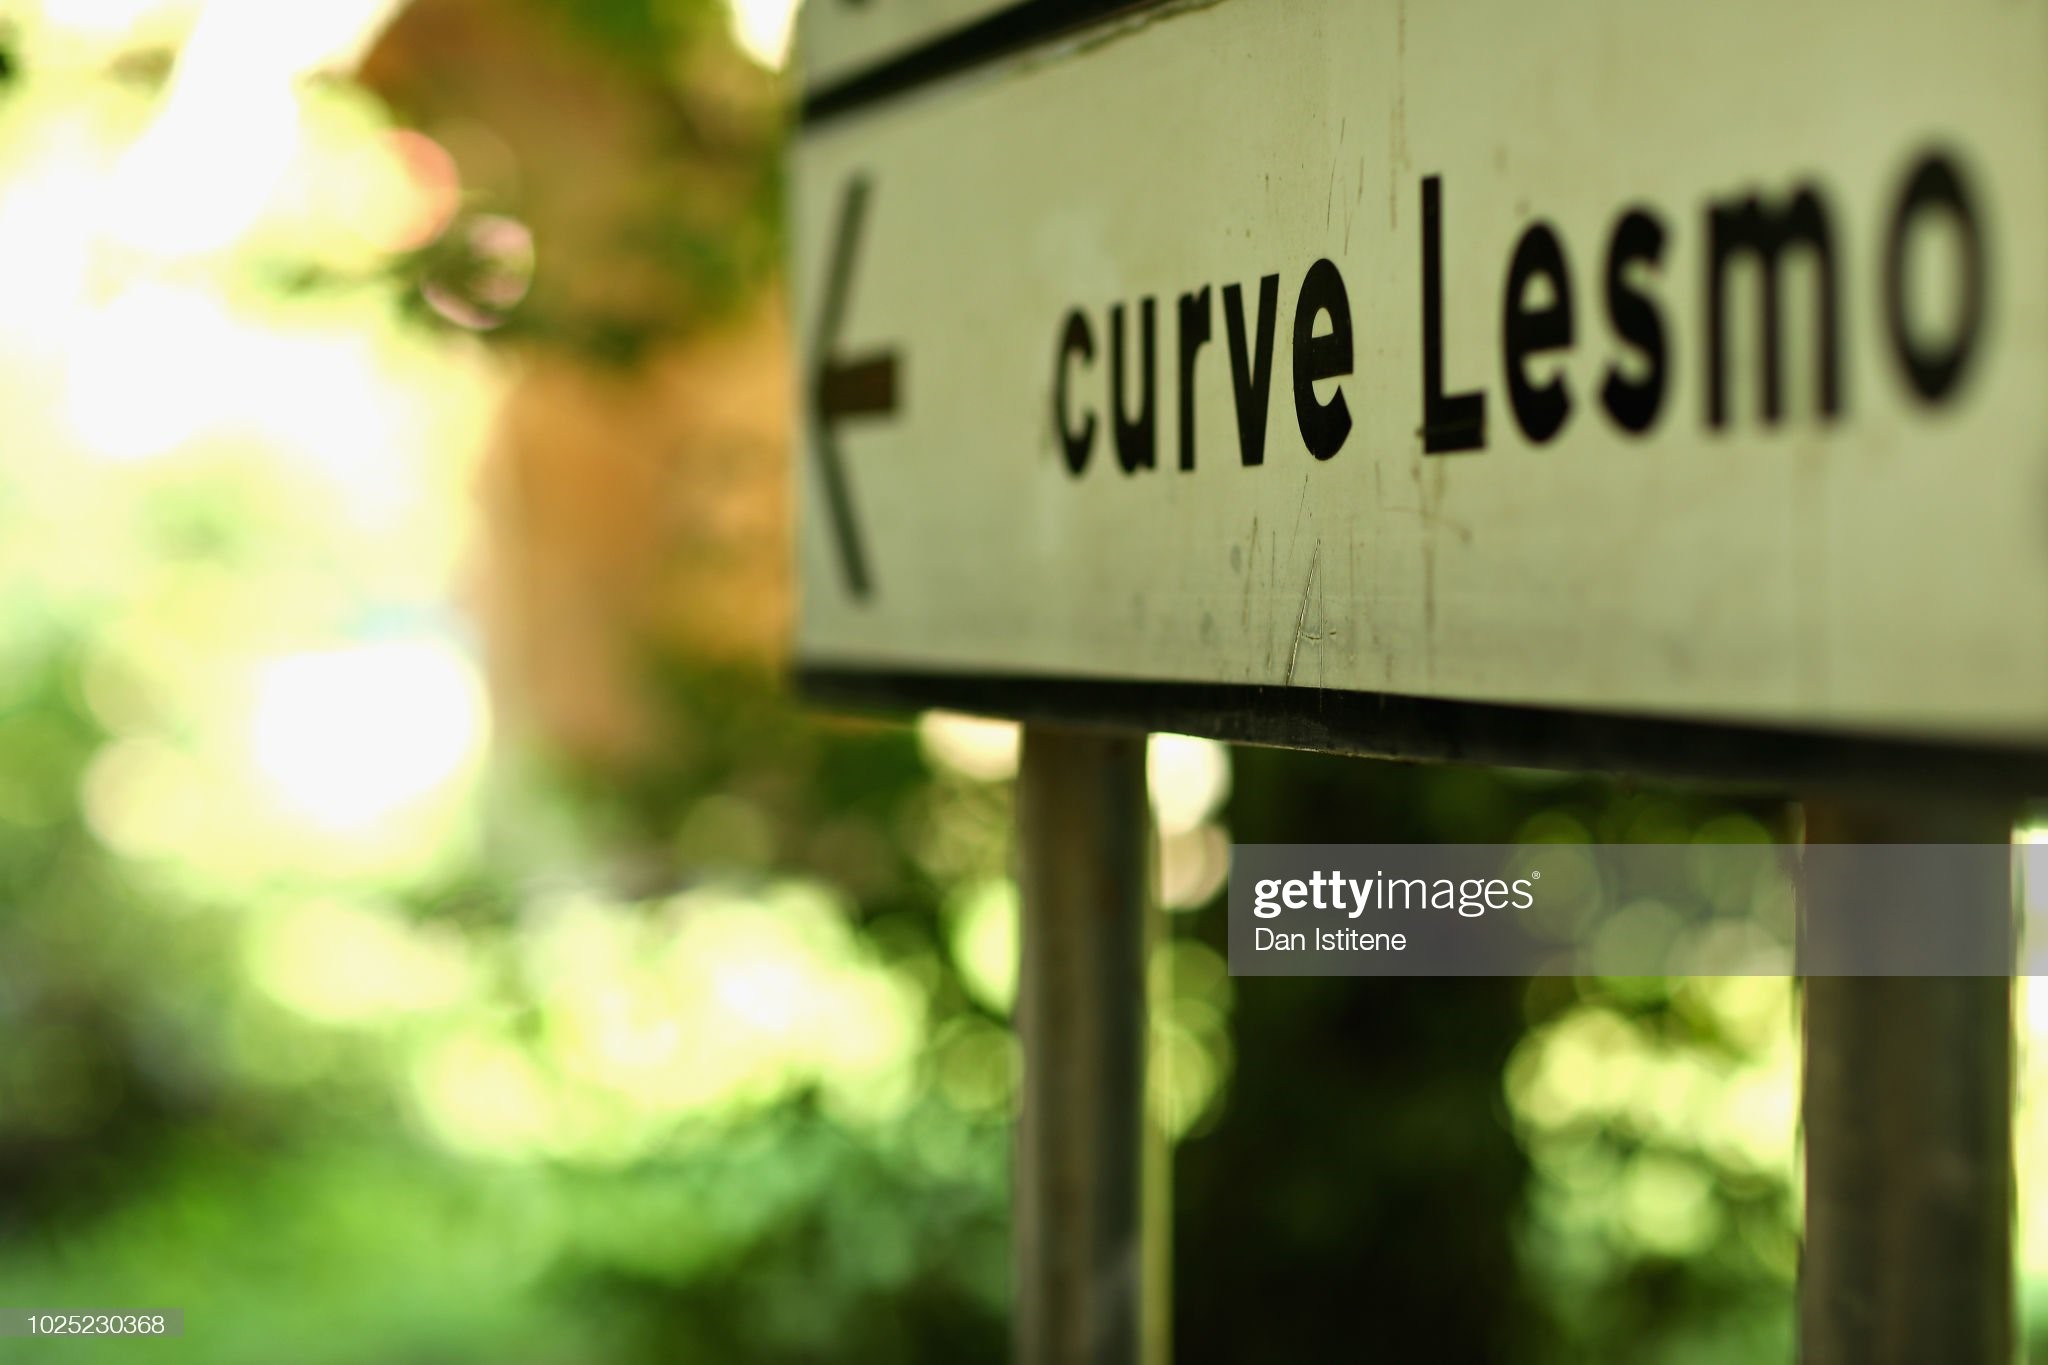 A general view of Curve Lesmo circuit signage.